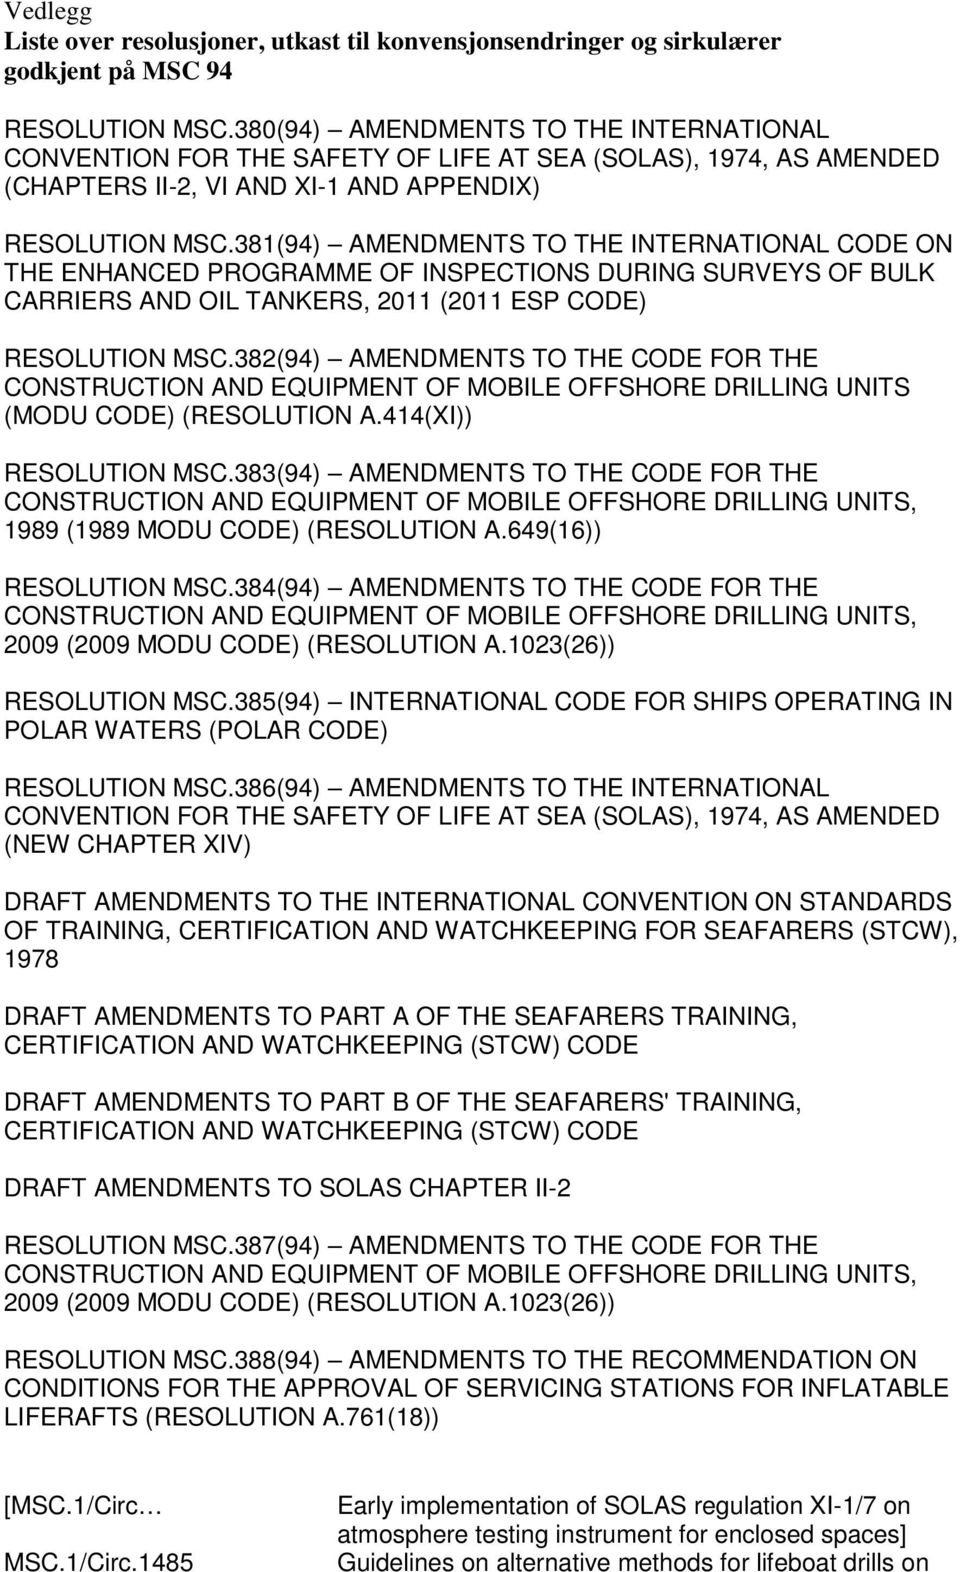 381(94) AMENDMENTS TO THE INTERNATIONAL CODE ON THE ENHANCED PROGRAMME OF INSPECTIONS DURING SURVEYS OF BULK CARRIERS AND OIL TANKERS, 2011 (2011 ESP CODE) RESOLUTION MSC.